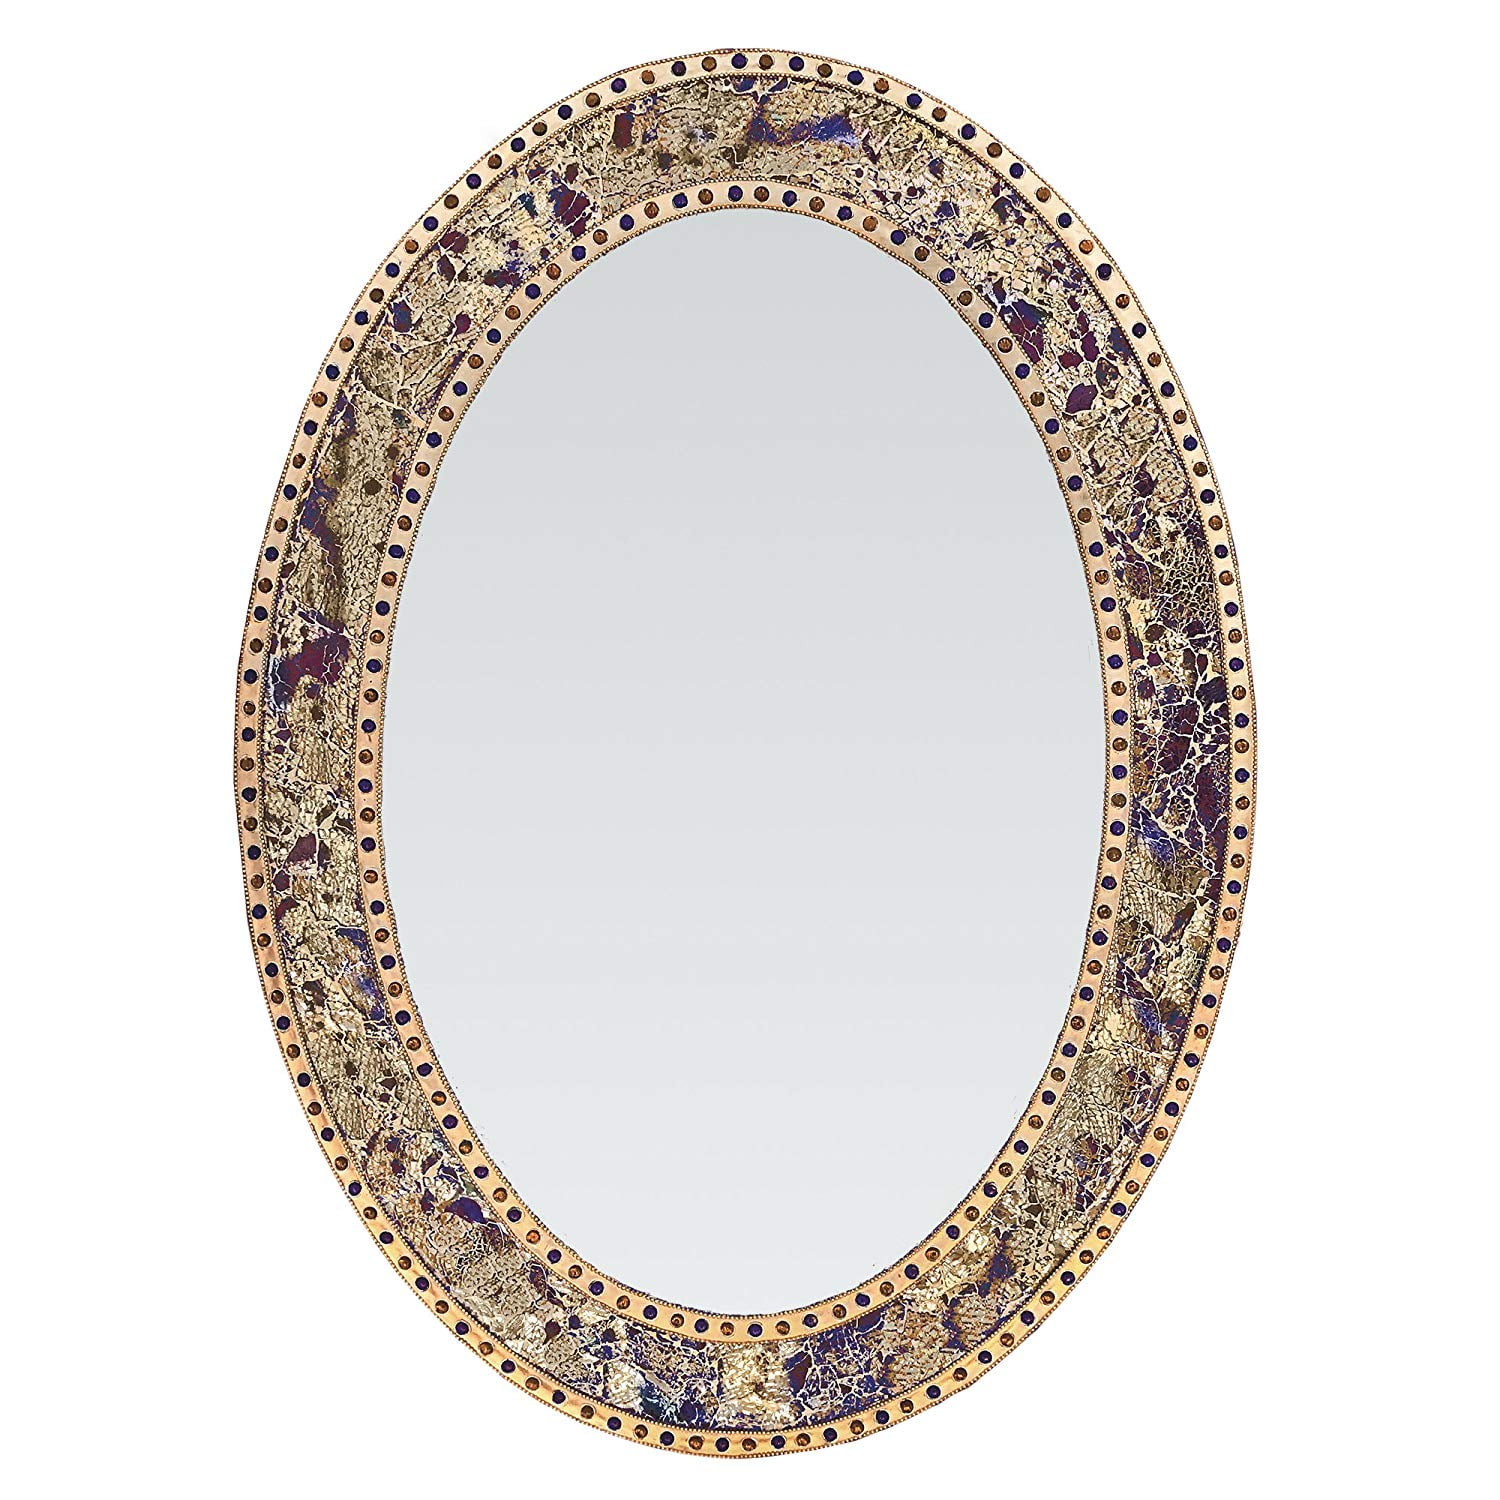 DecorShore Fired Gold 32.5 in. x 24.5 in. Decorative Wall Mirror, Oval